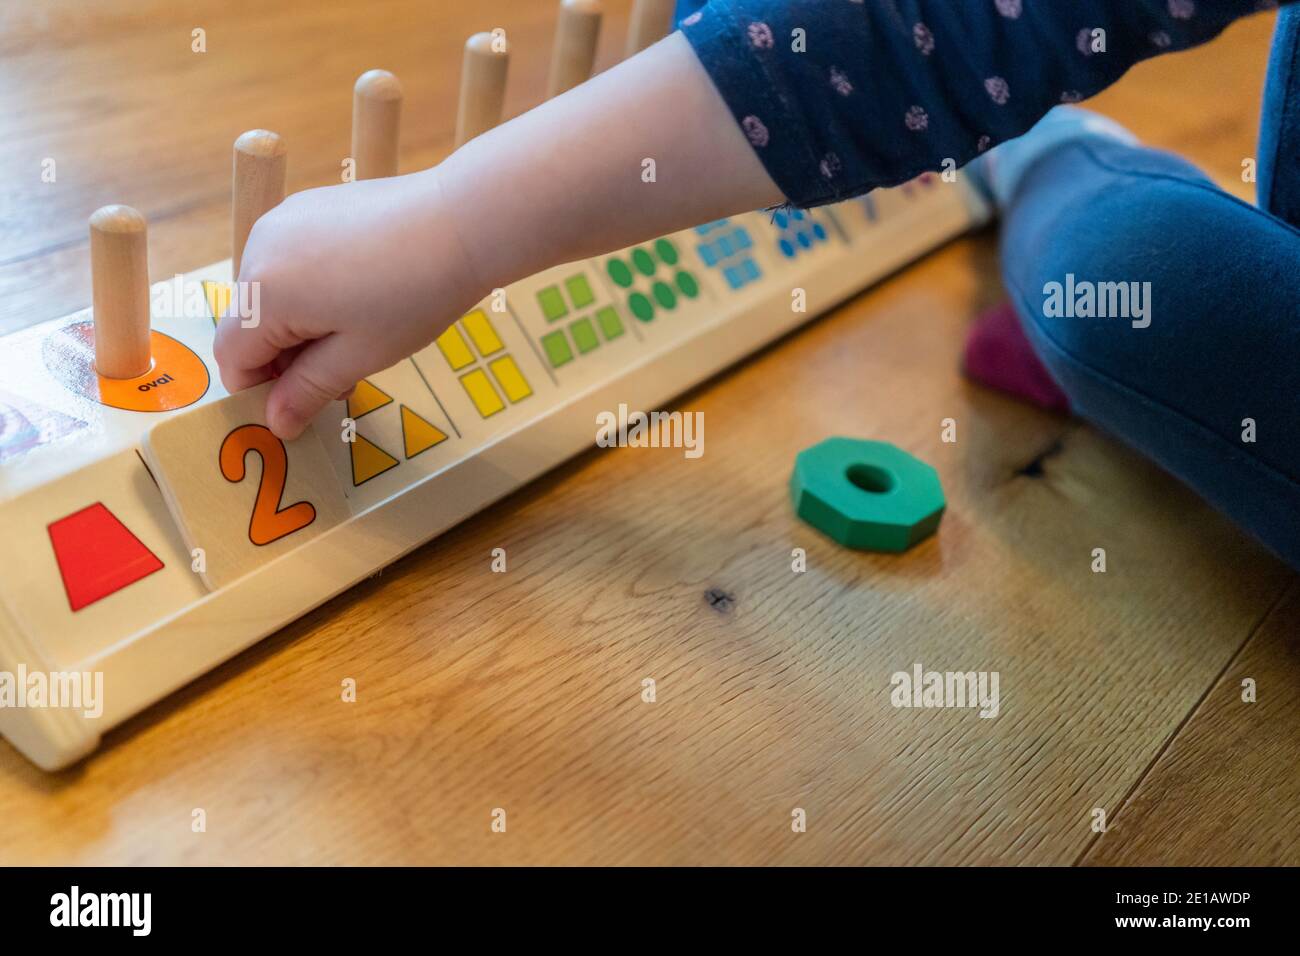 A young two year old child sitting on the floor and learning to count with a wooden counting shapes stacker educational toy Stock Photo